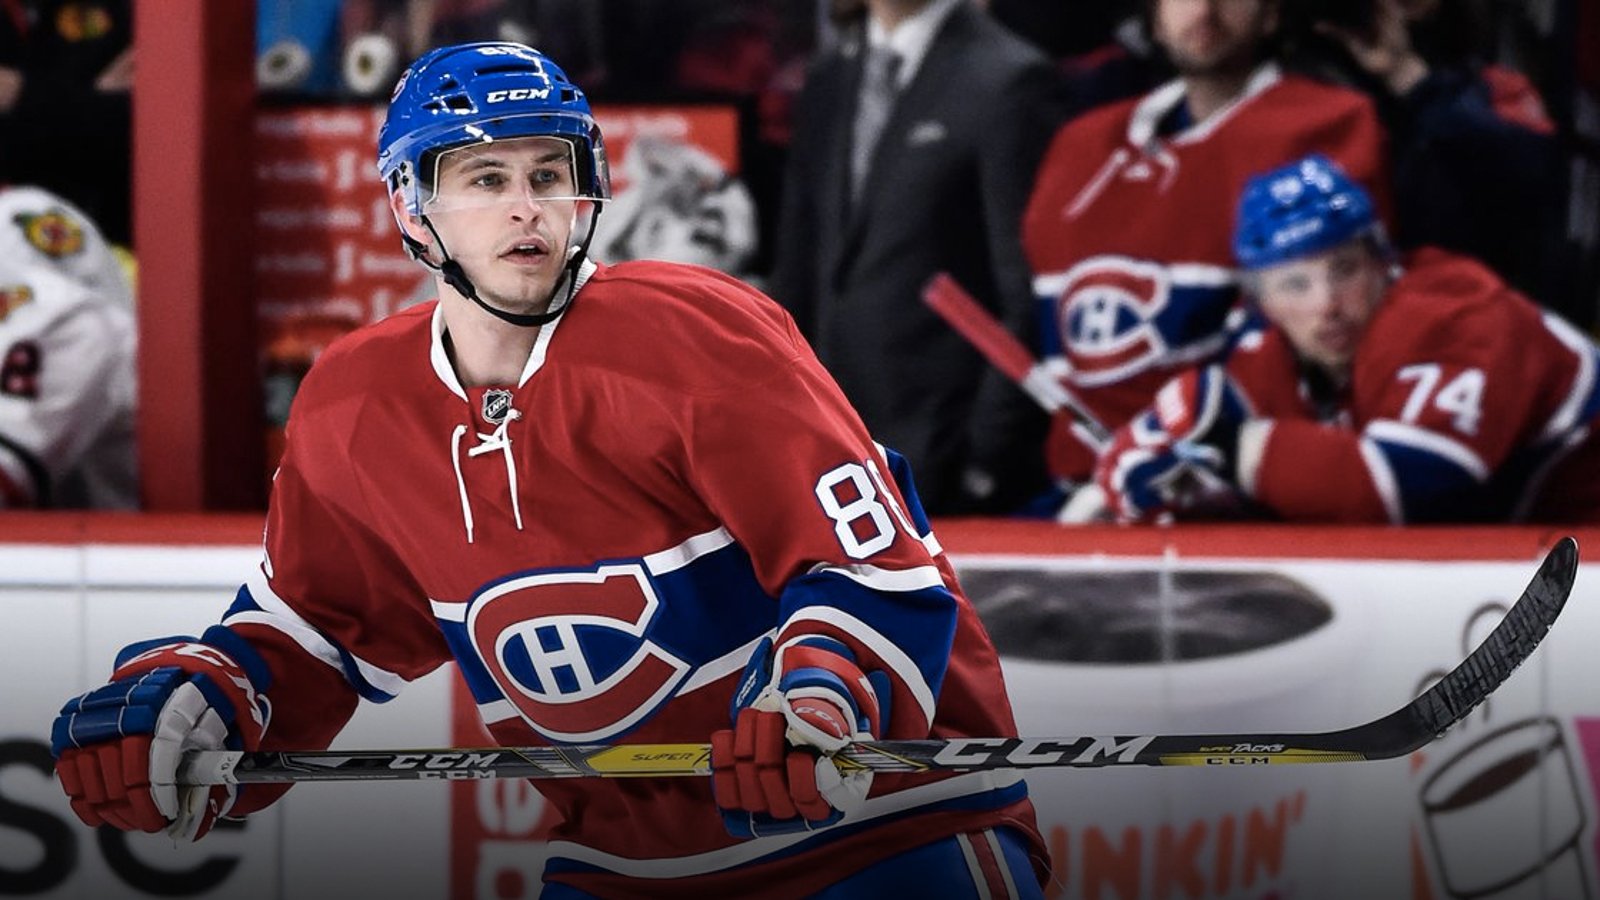 Breaking: Habs appear to be done with Davidson